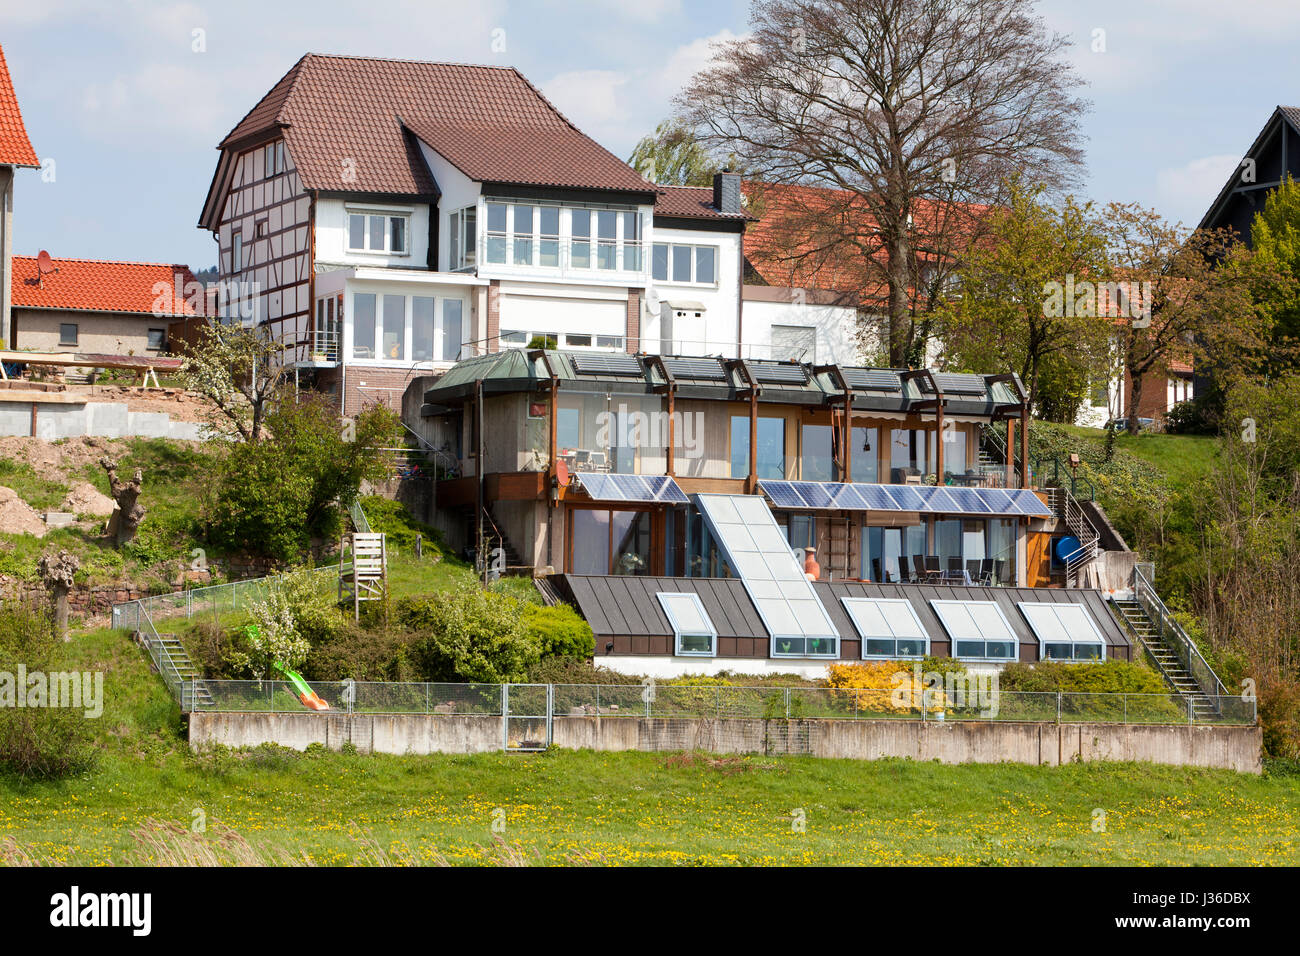 Rear of the houses on the banks of the River Weser, Bodenfelde, district of Northeim, Lower Saxony, Germany Stock Photo